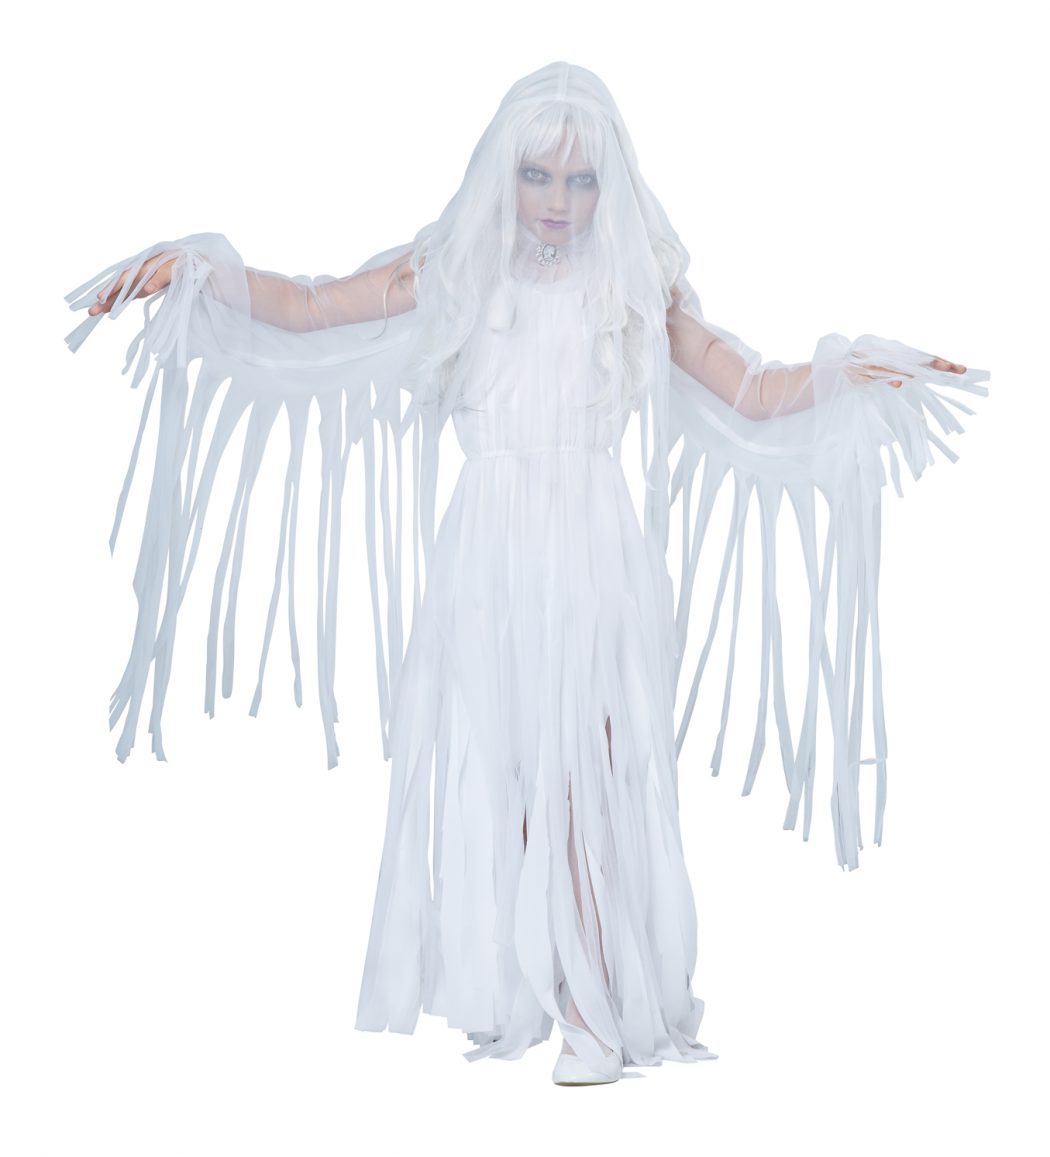 A ghost2 Top 10 Teenagers Halloween Costumes Trends - 17